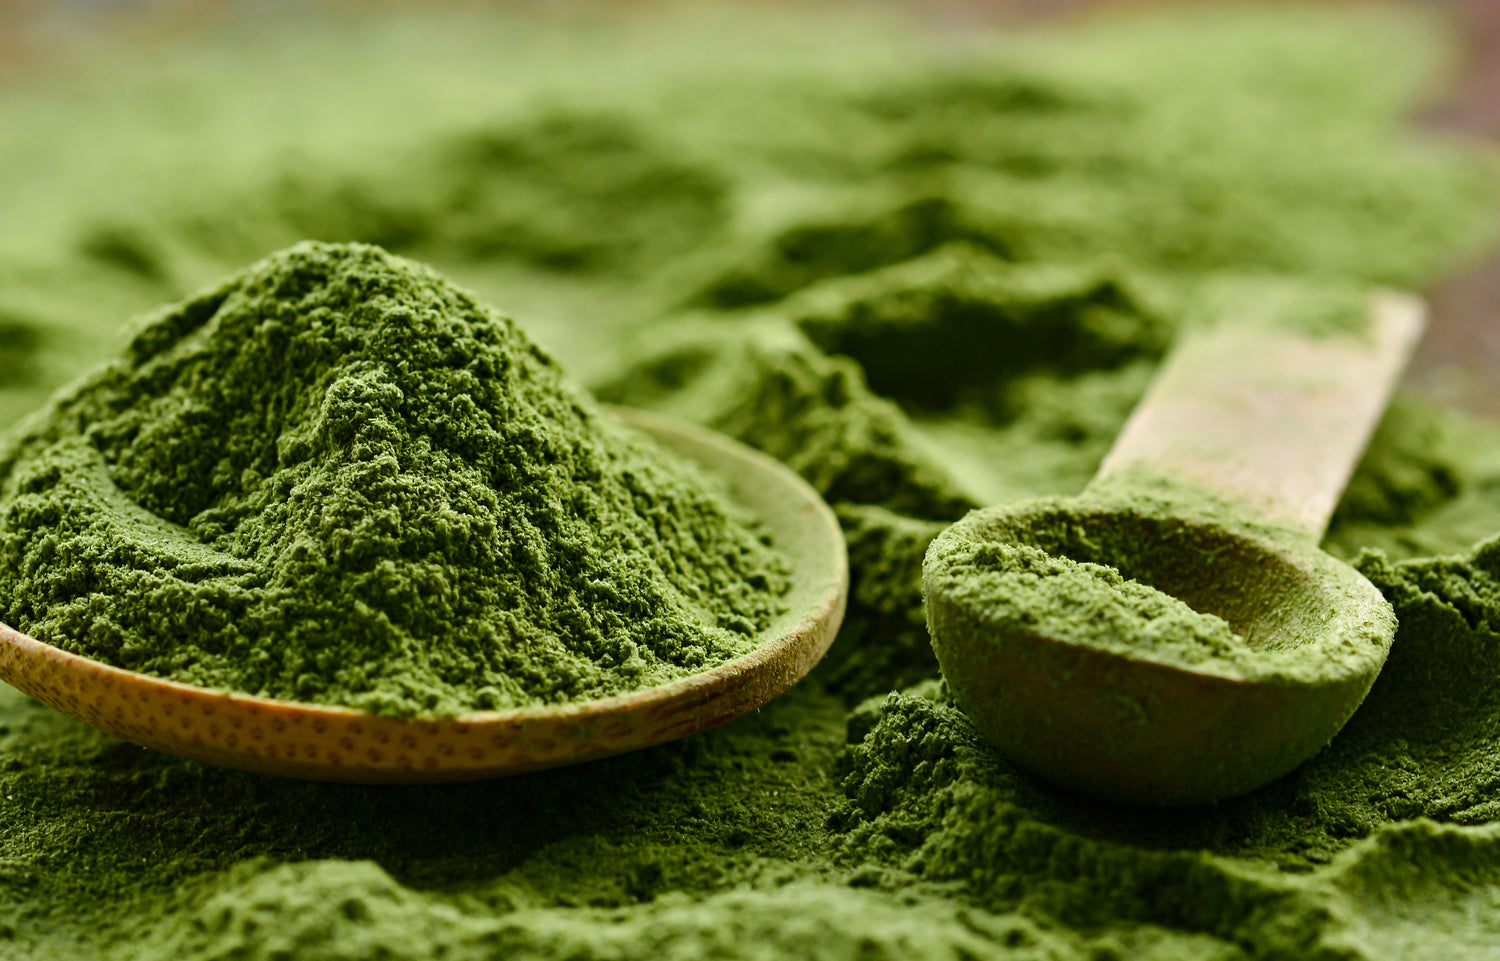 Superfood powder in a bowl